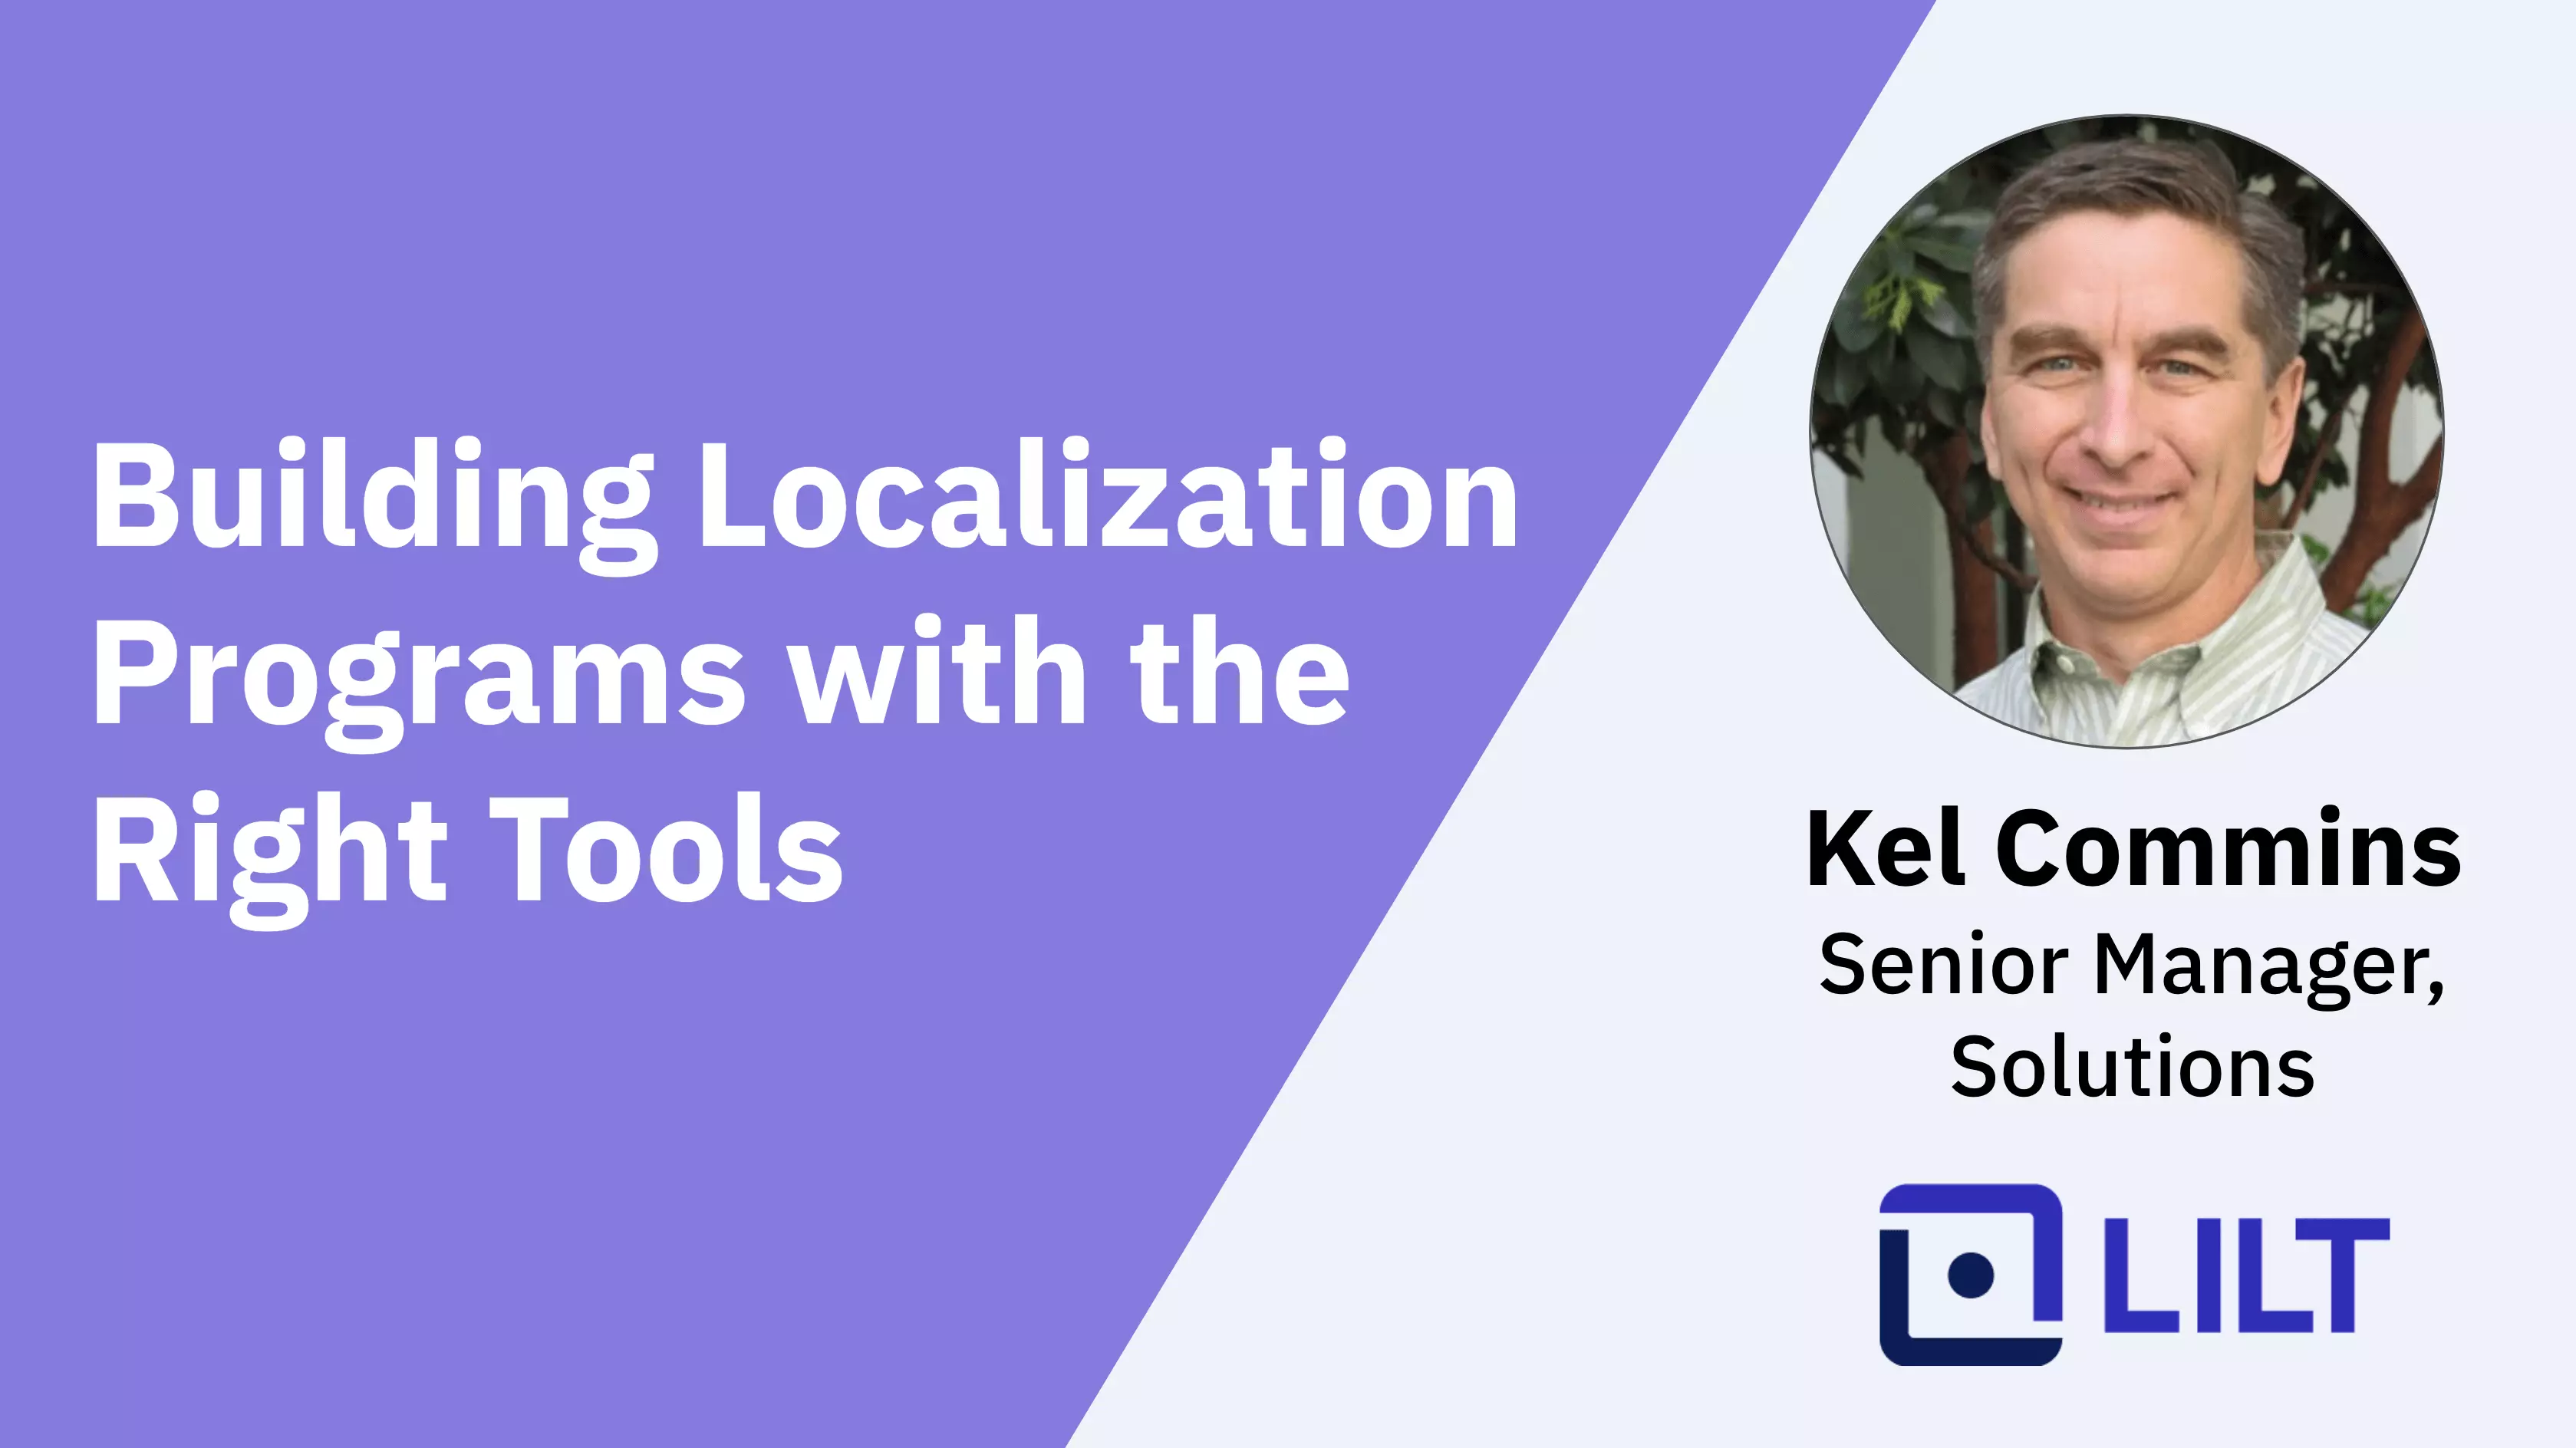 Building Localization Programs with the Right Tools